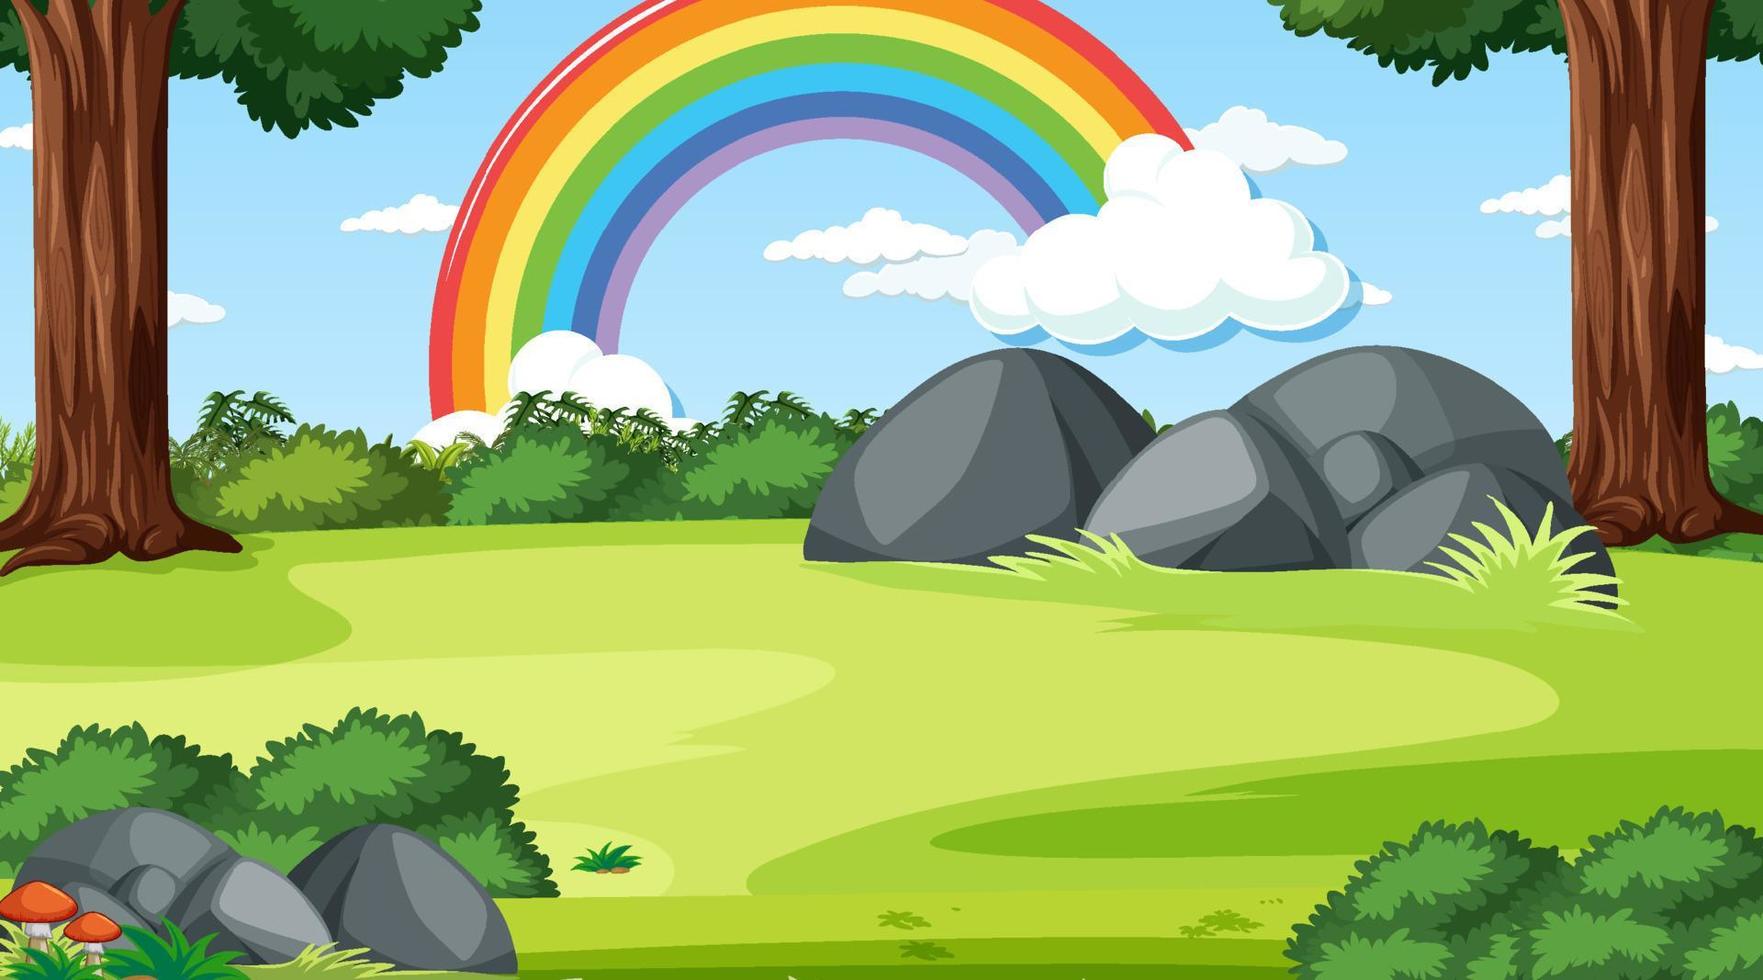 Nature forest scene with rainbow in the sky vector